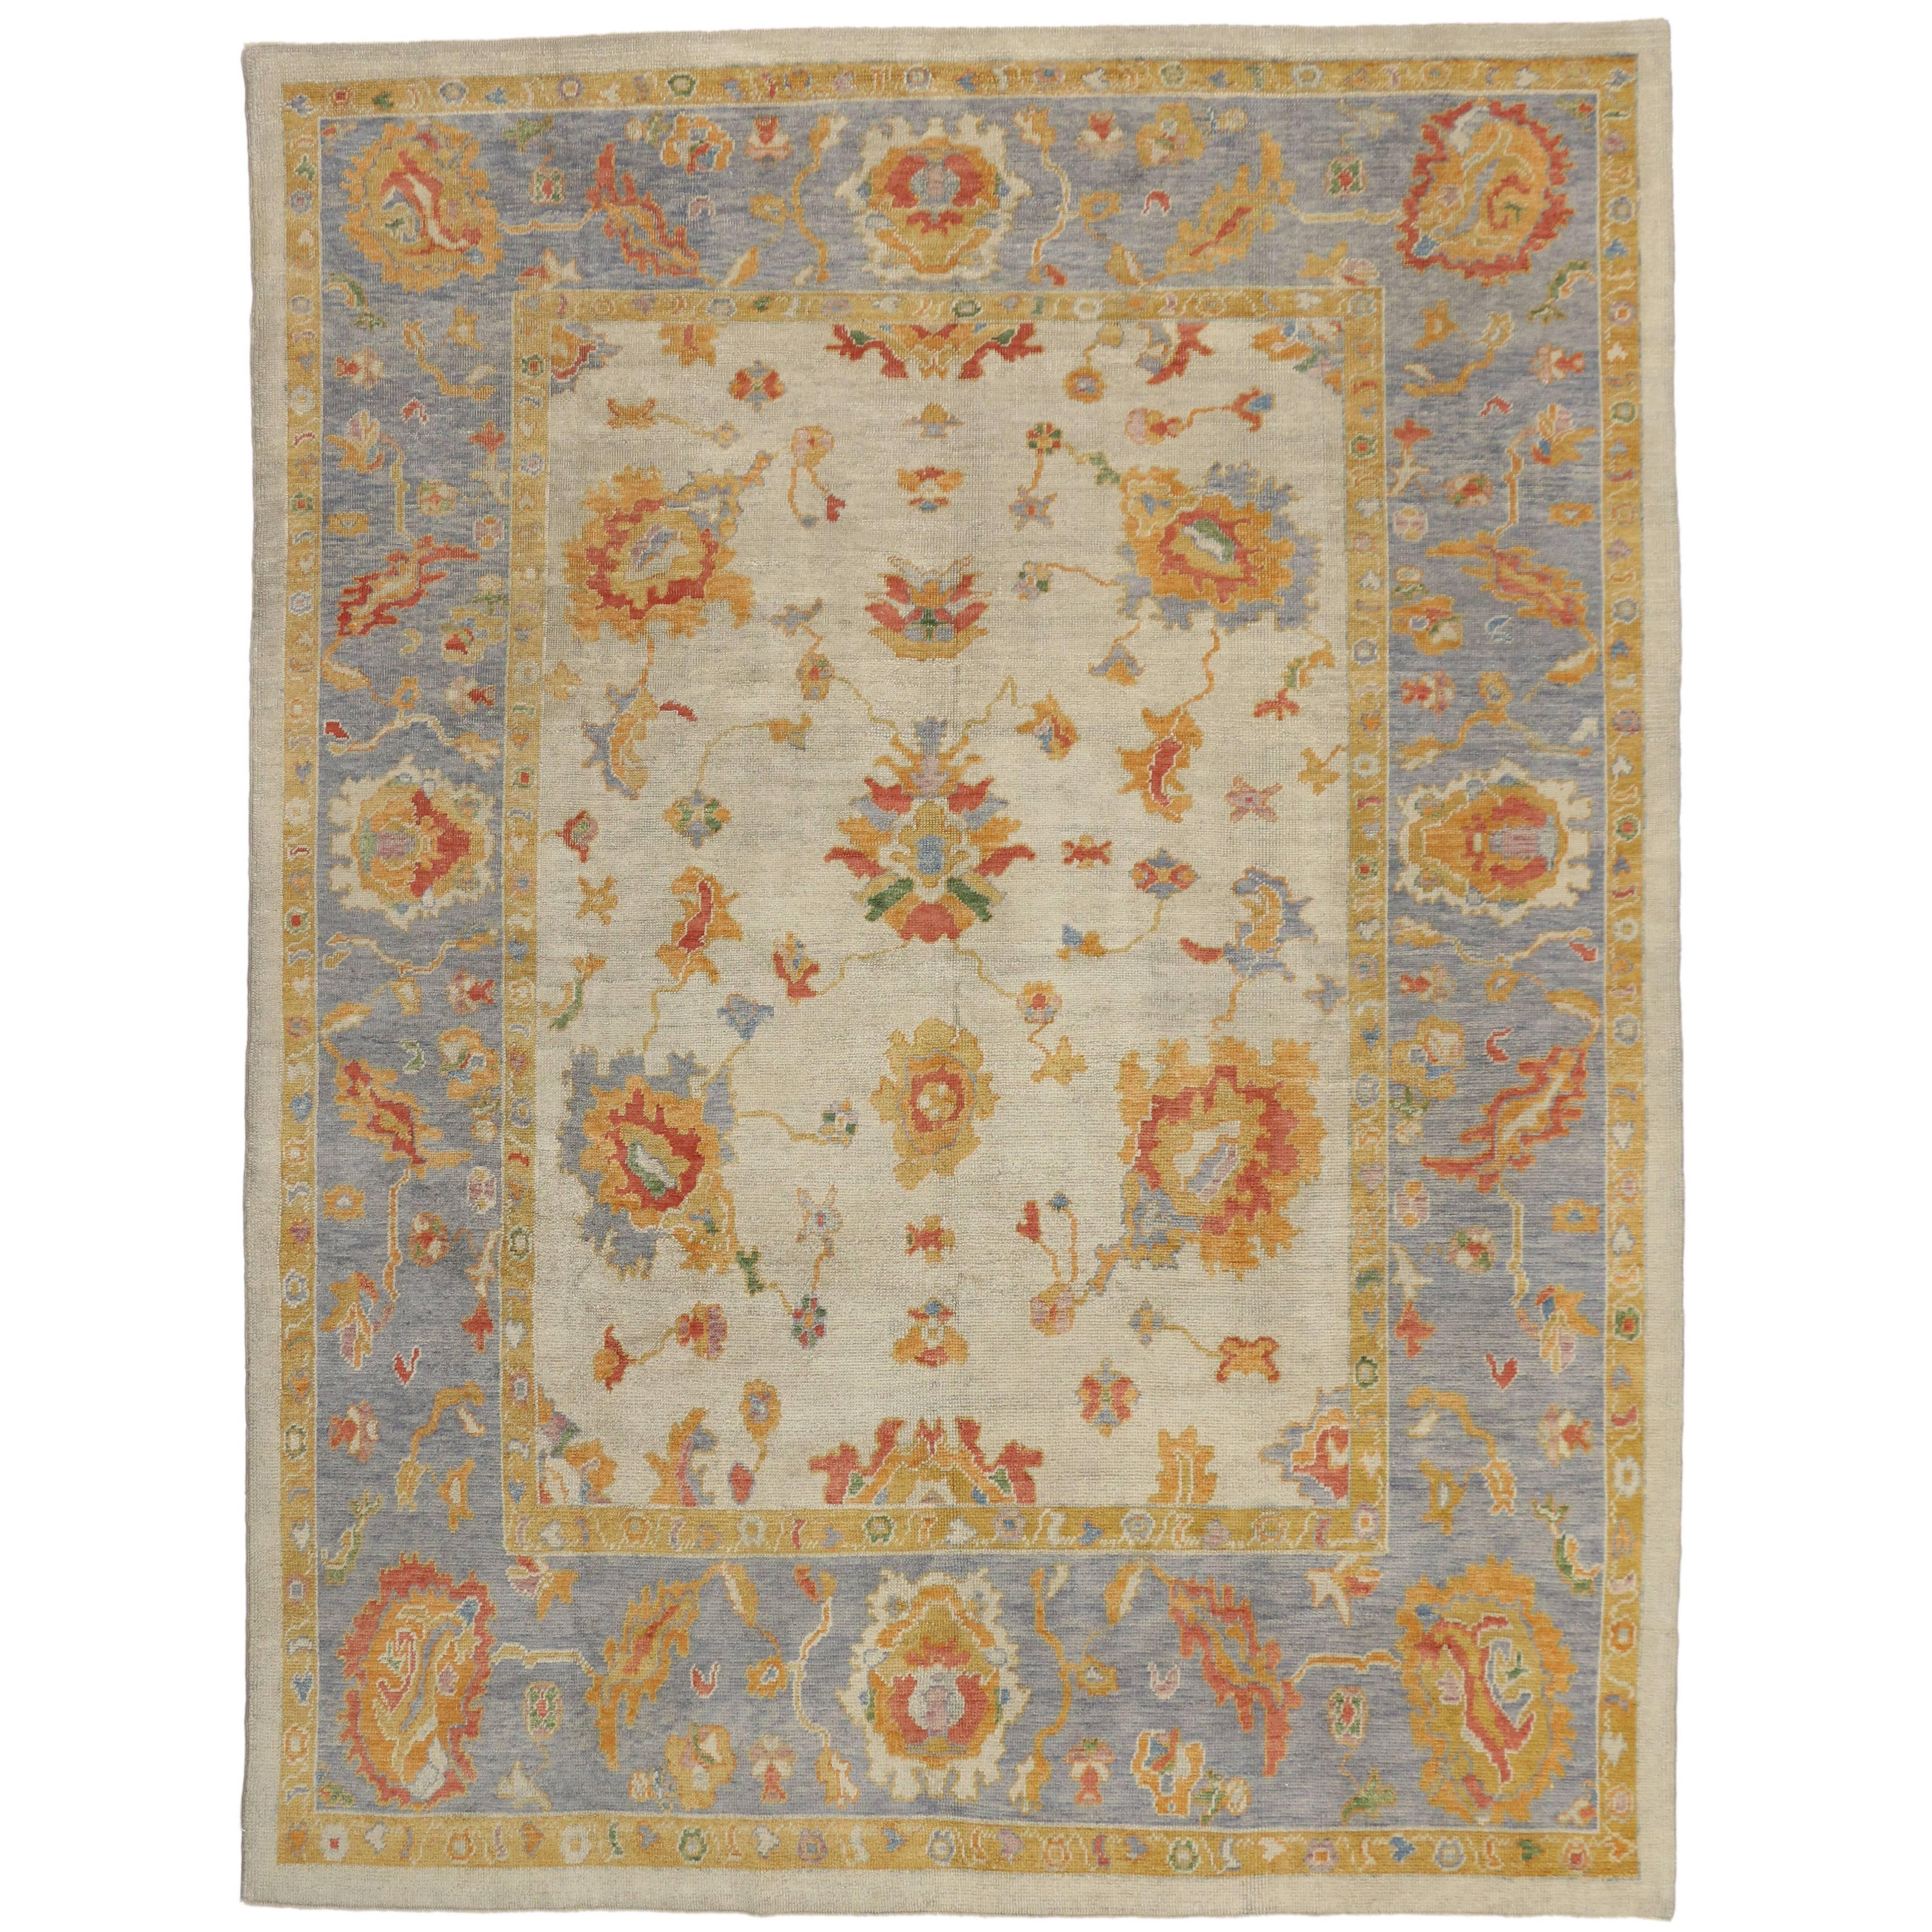 Contemporary Turkish Oushak Rug in Pastel Colors with Tribal Boho Chic Style